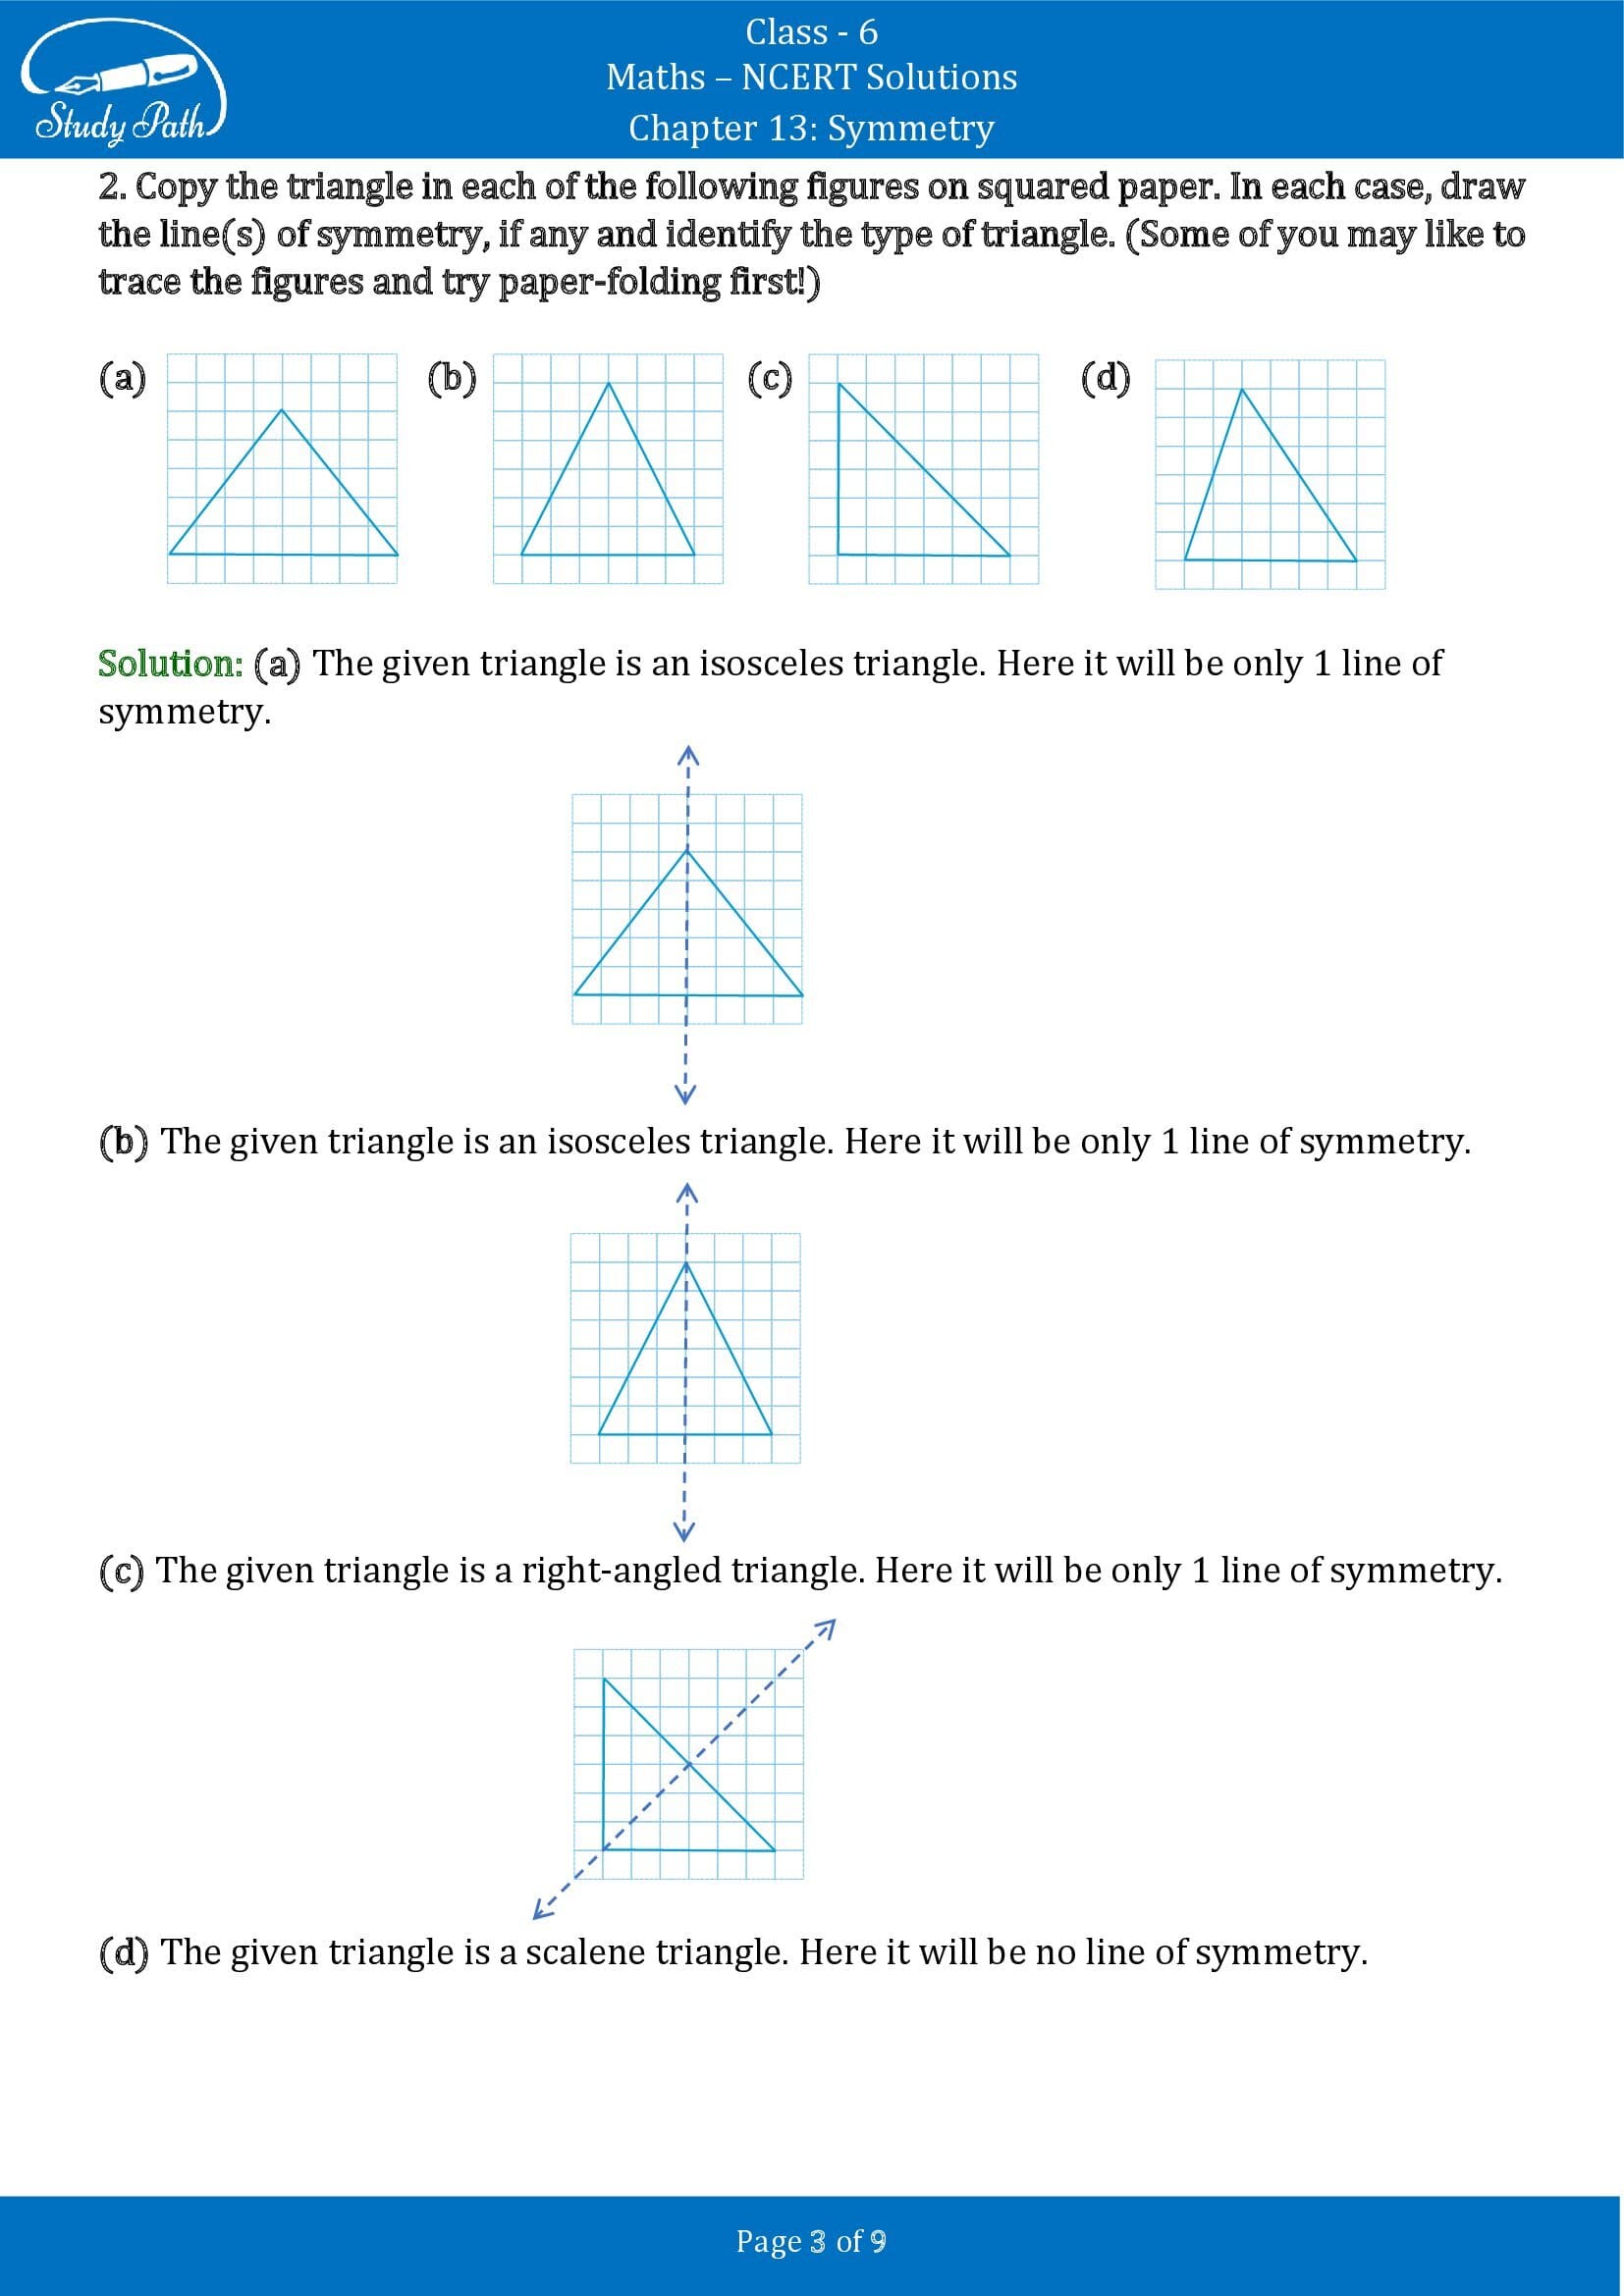 NCERT Solutions for Class 6 Maths Chapter 13 Symmetry Exercise 13.2 00003